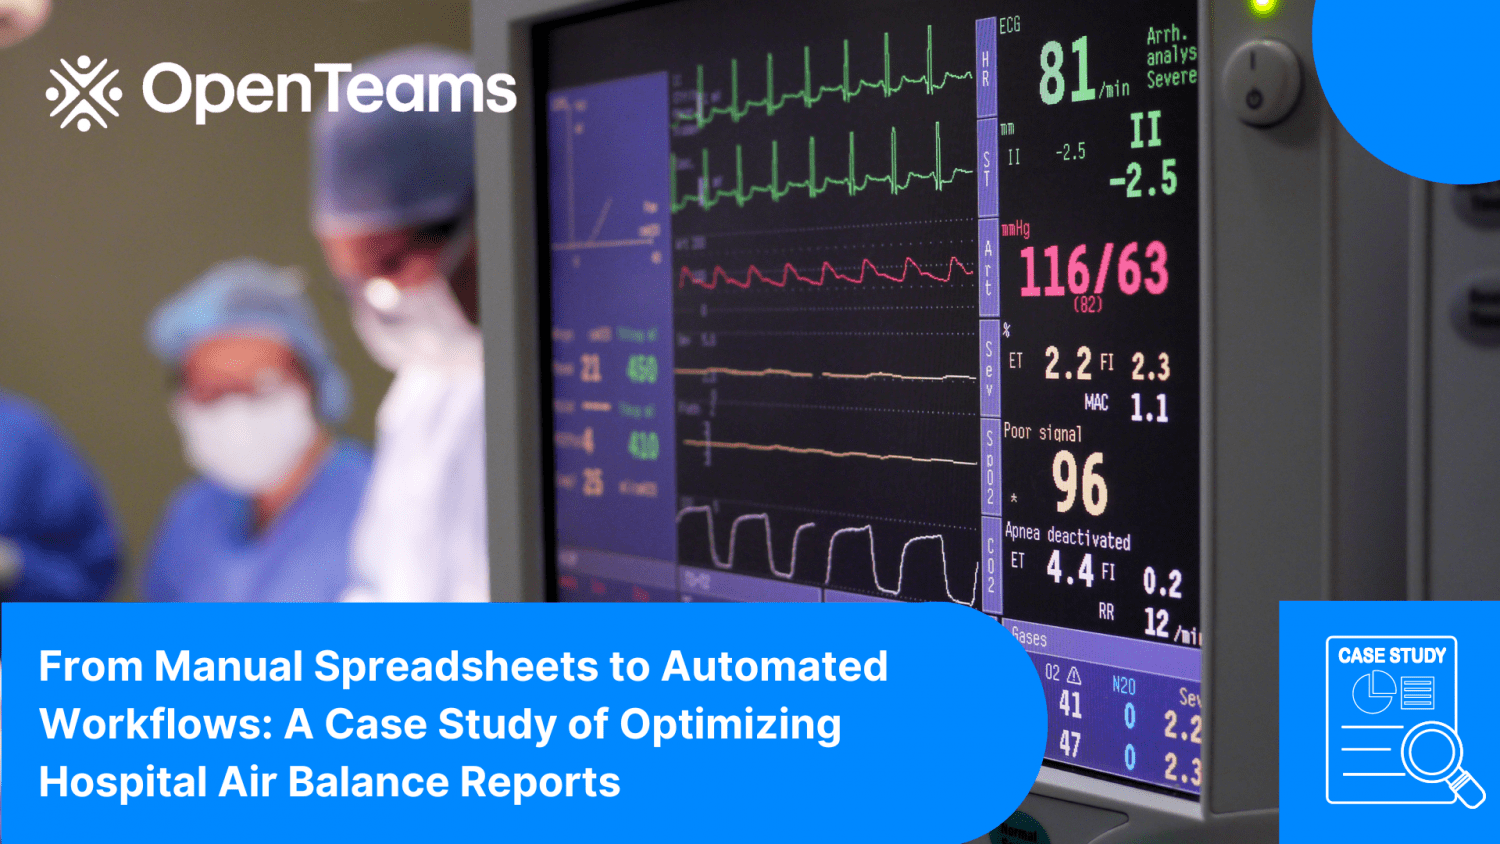 From Manual Spreadsheets to Automated Workflows: A Case Study of Optimizing Hospital Air Balance Reports